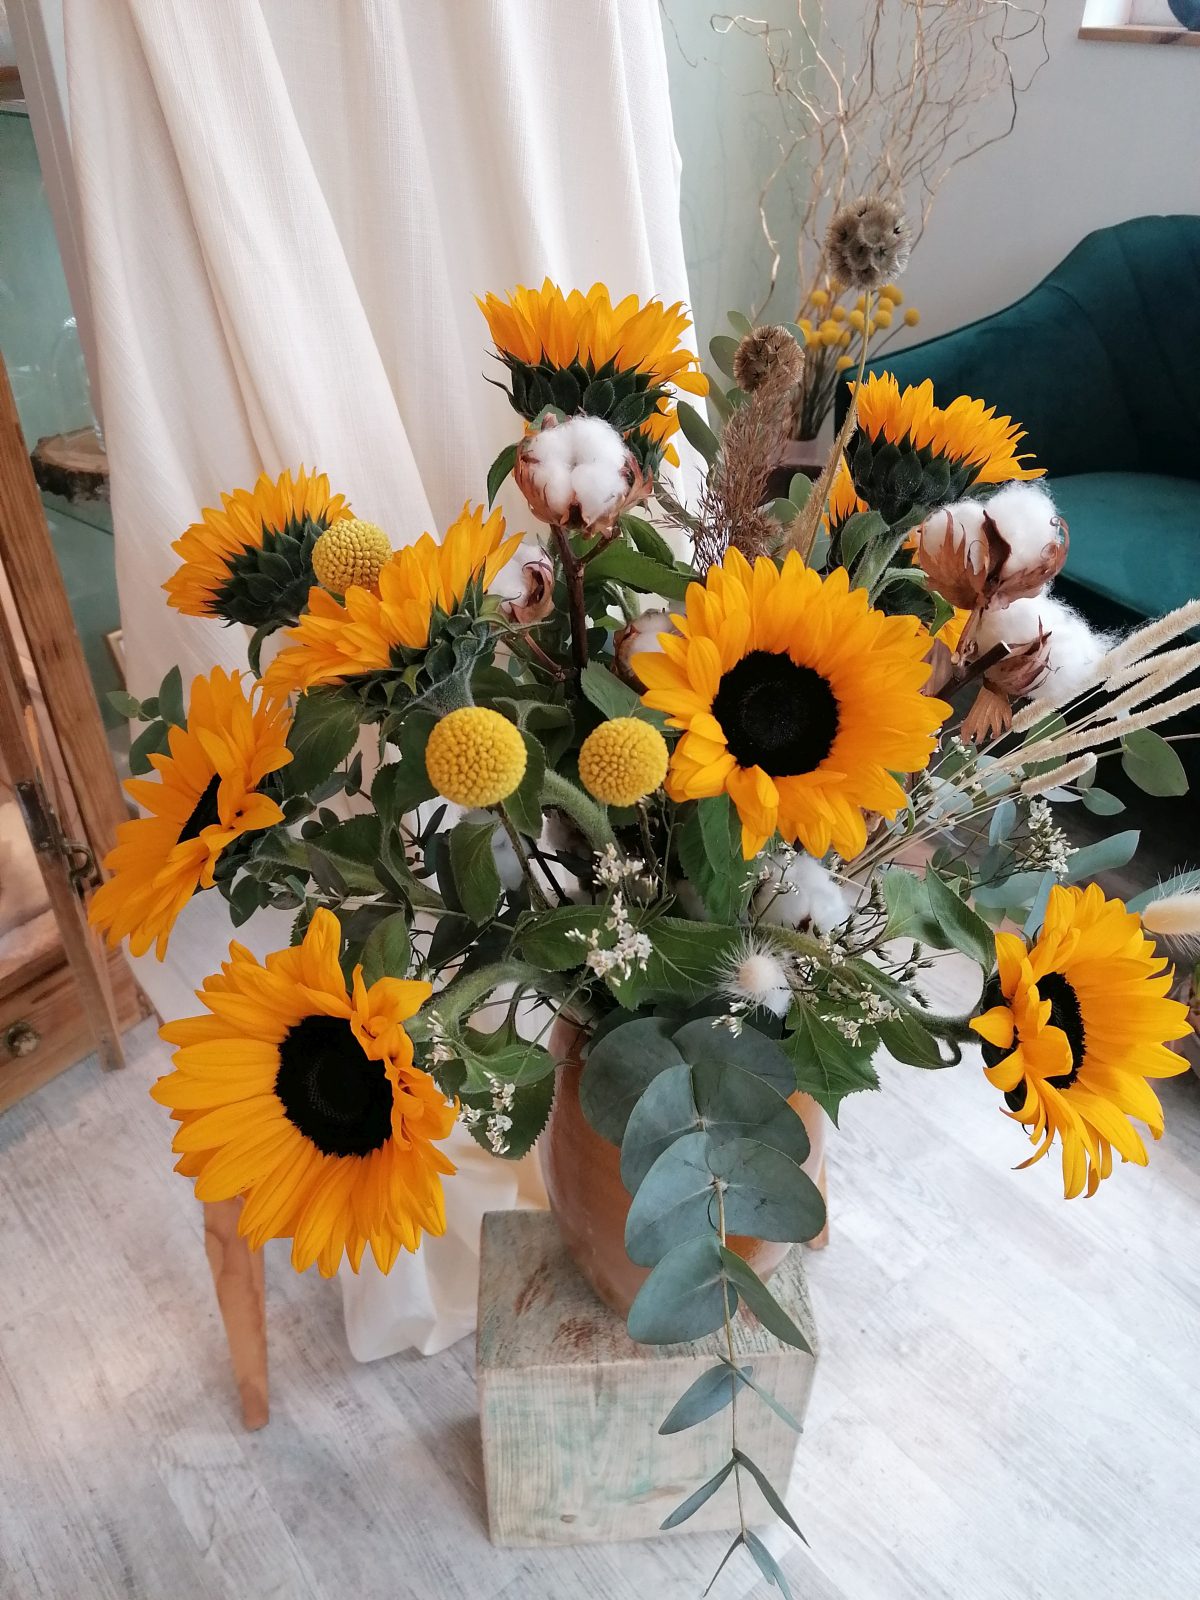 This is a proposal of 11 sunflowers in a natural setting. The bouquet is sure to appeal to those who prefer simple, minimalist solutions.